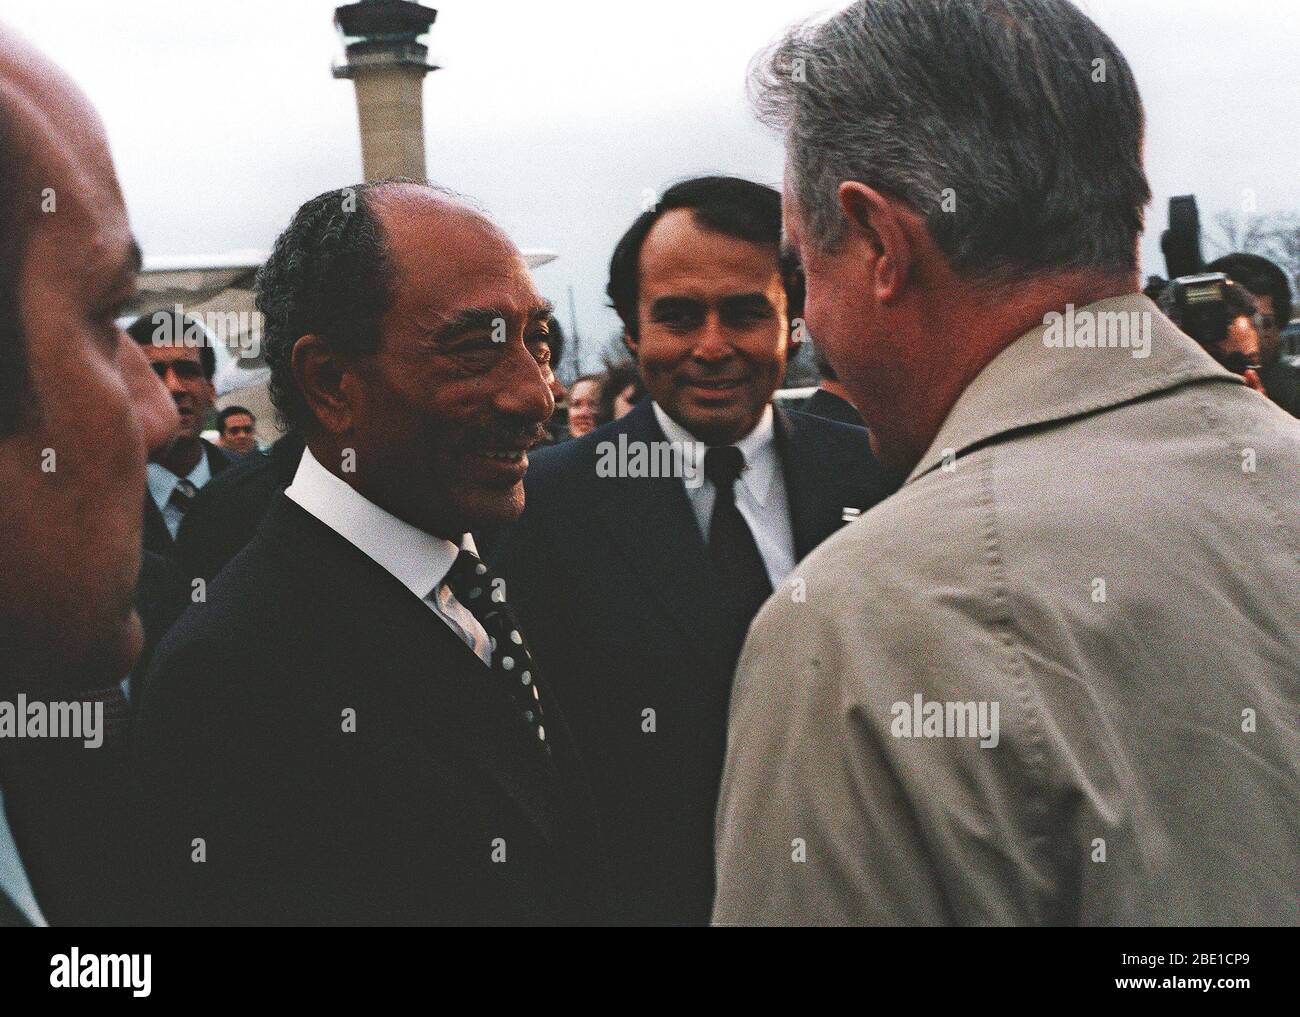 1980 - President Anwar Sadat of Egypt is welcomed by Secretary of State Cyrus Vance upon his arrival in the United States for a visit. Stock Photo